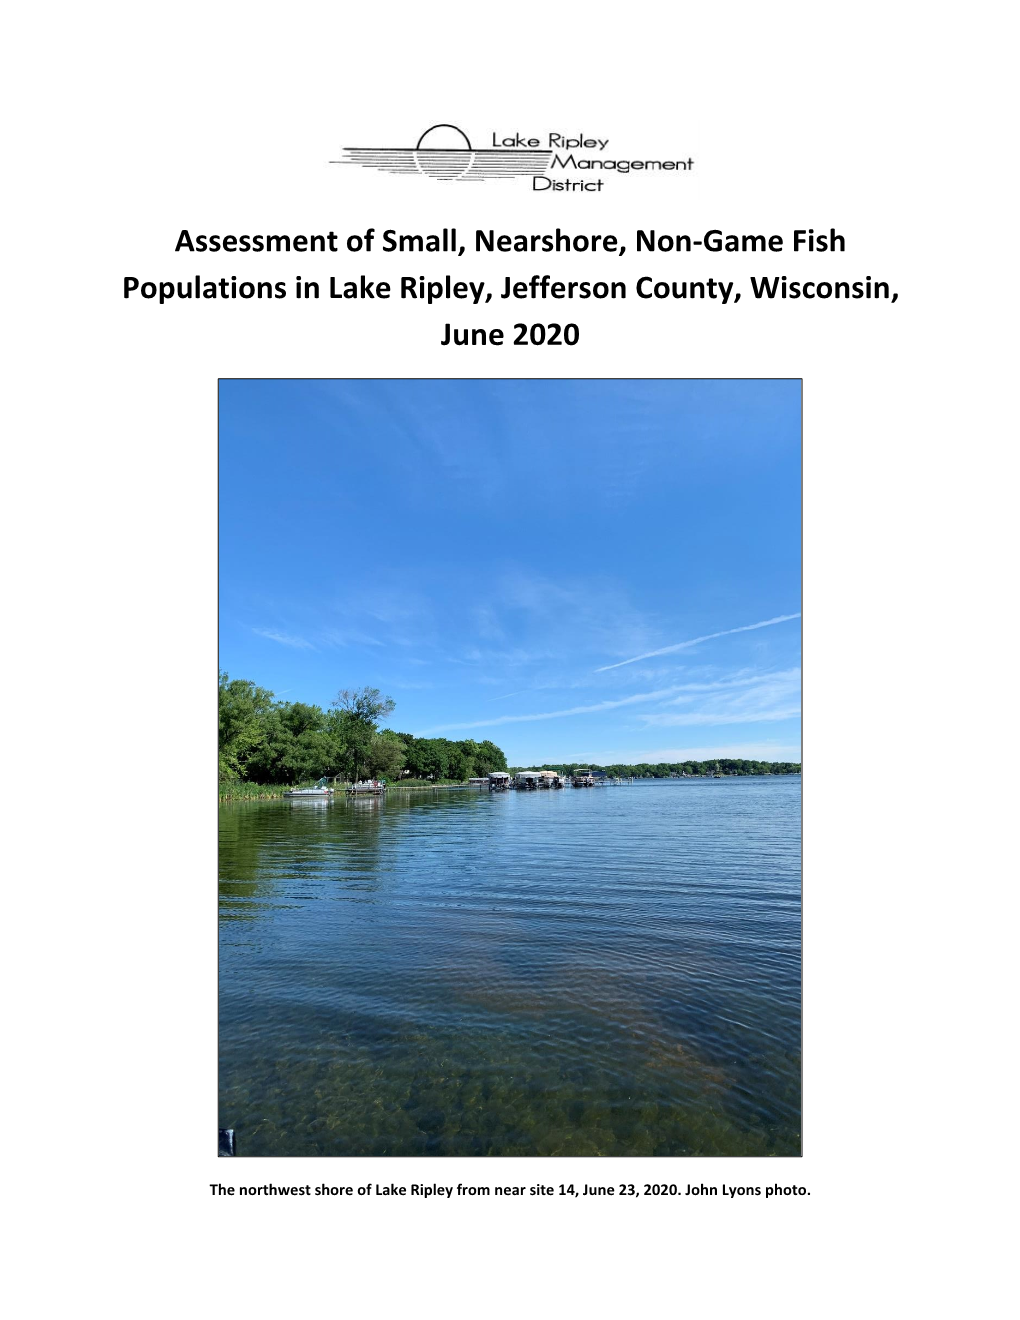 2020 Assessment of Nearshore Fish Populations